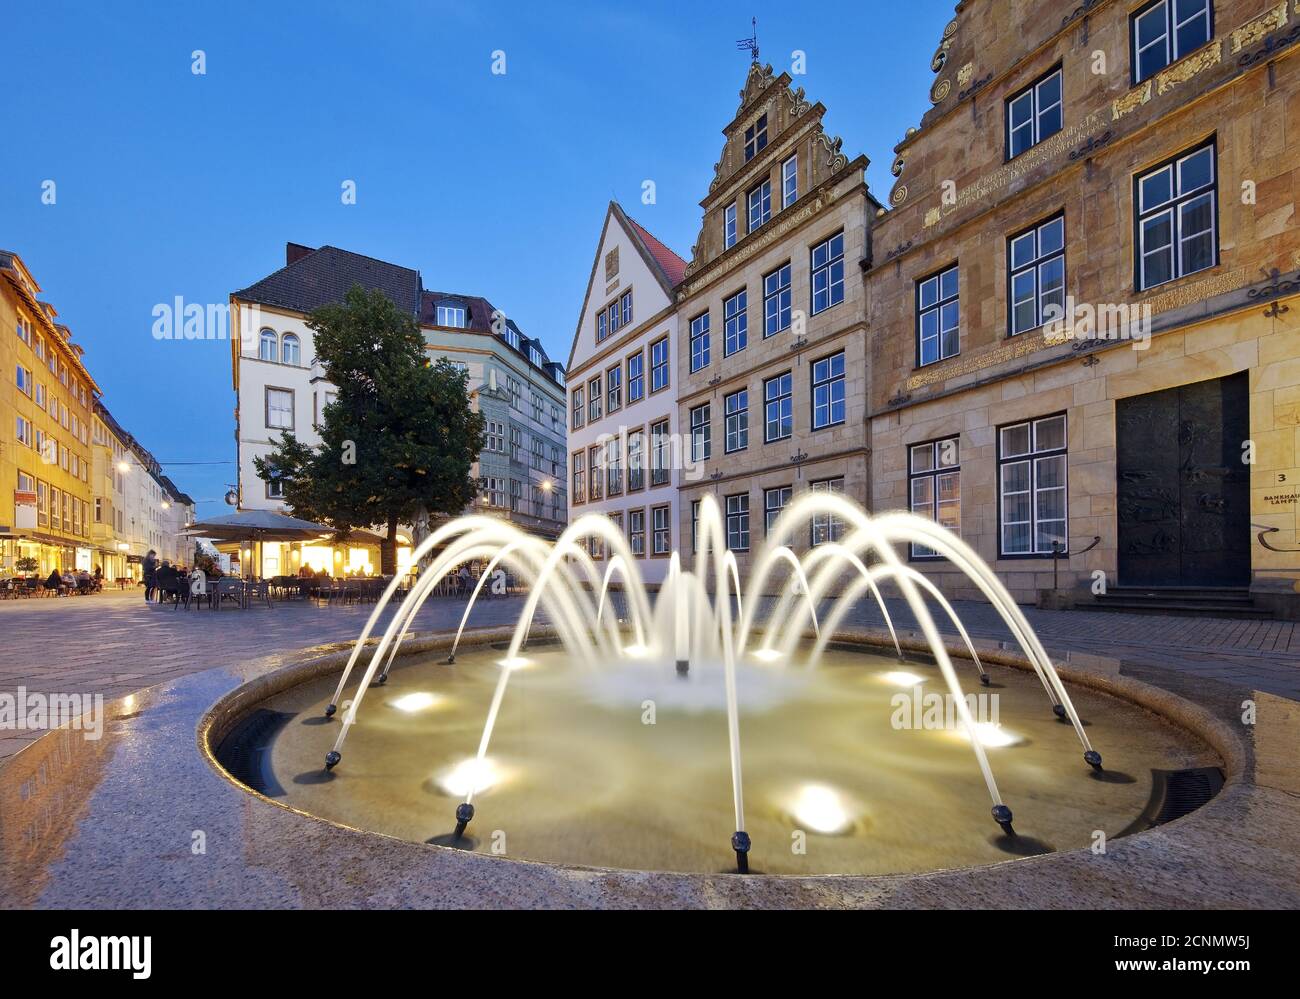 Old market with fountain and buerger houses in the evening, Bielefeld, Germany, Europe Stock Photo